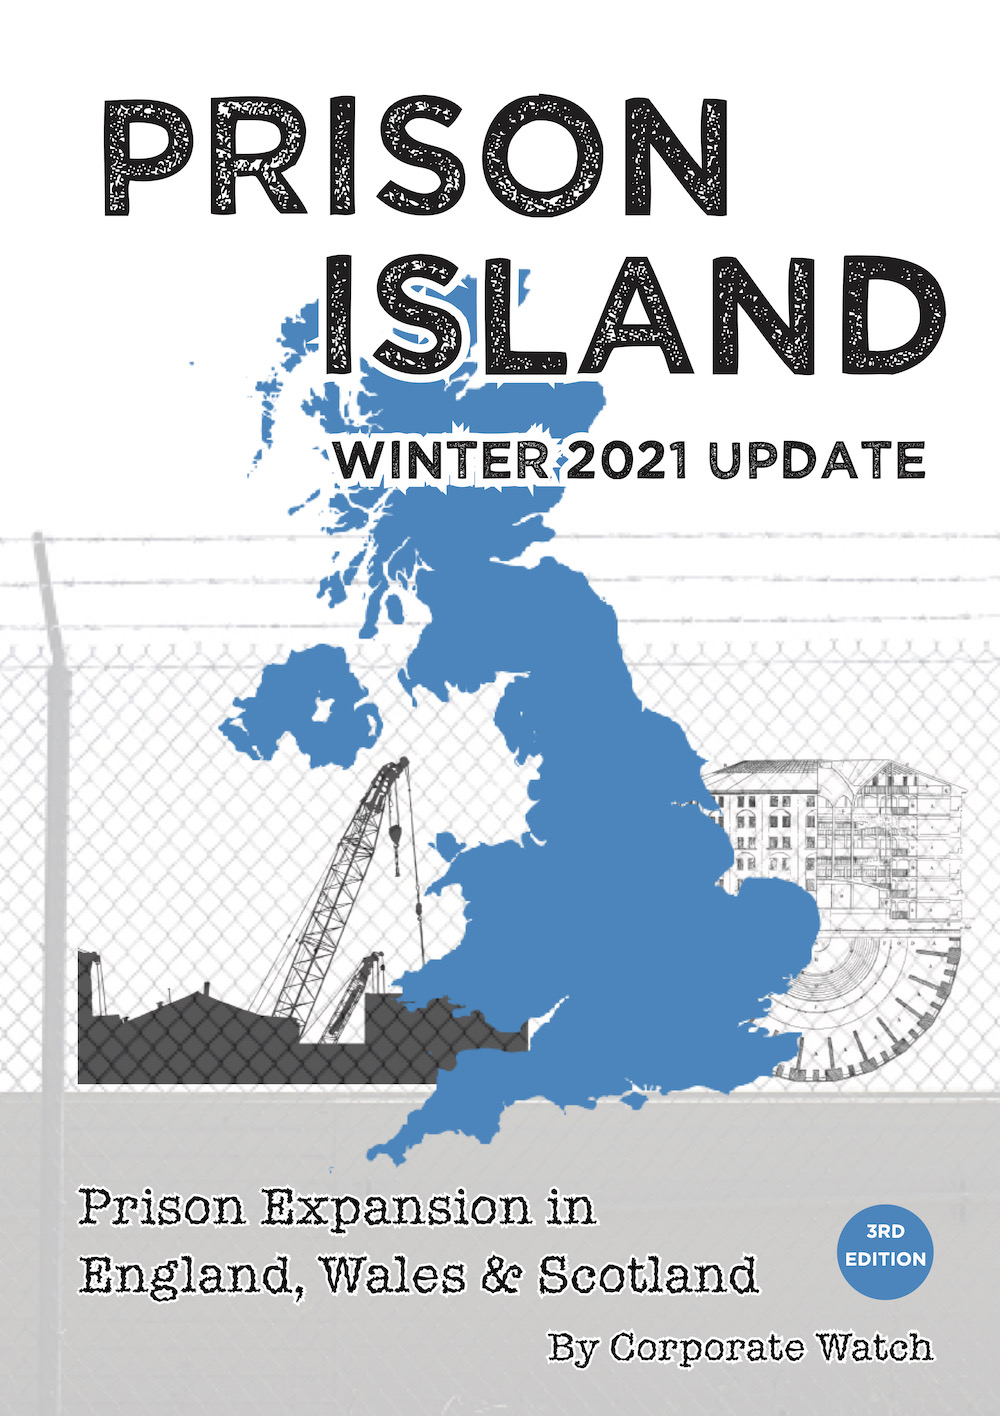 Images shows a picture of the UK in blue, with a prison illustration in the background and a crane illustration